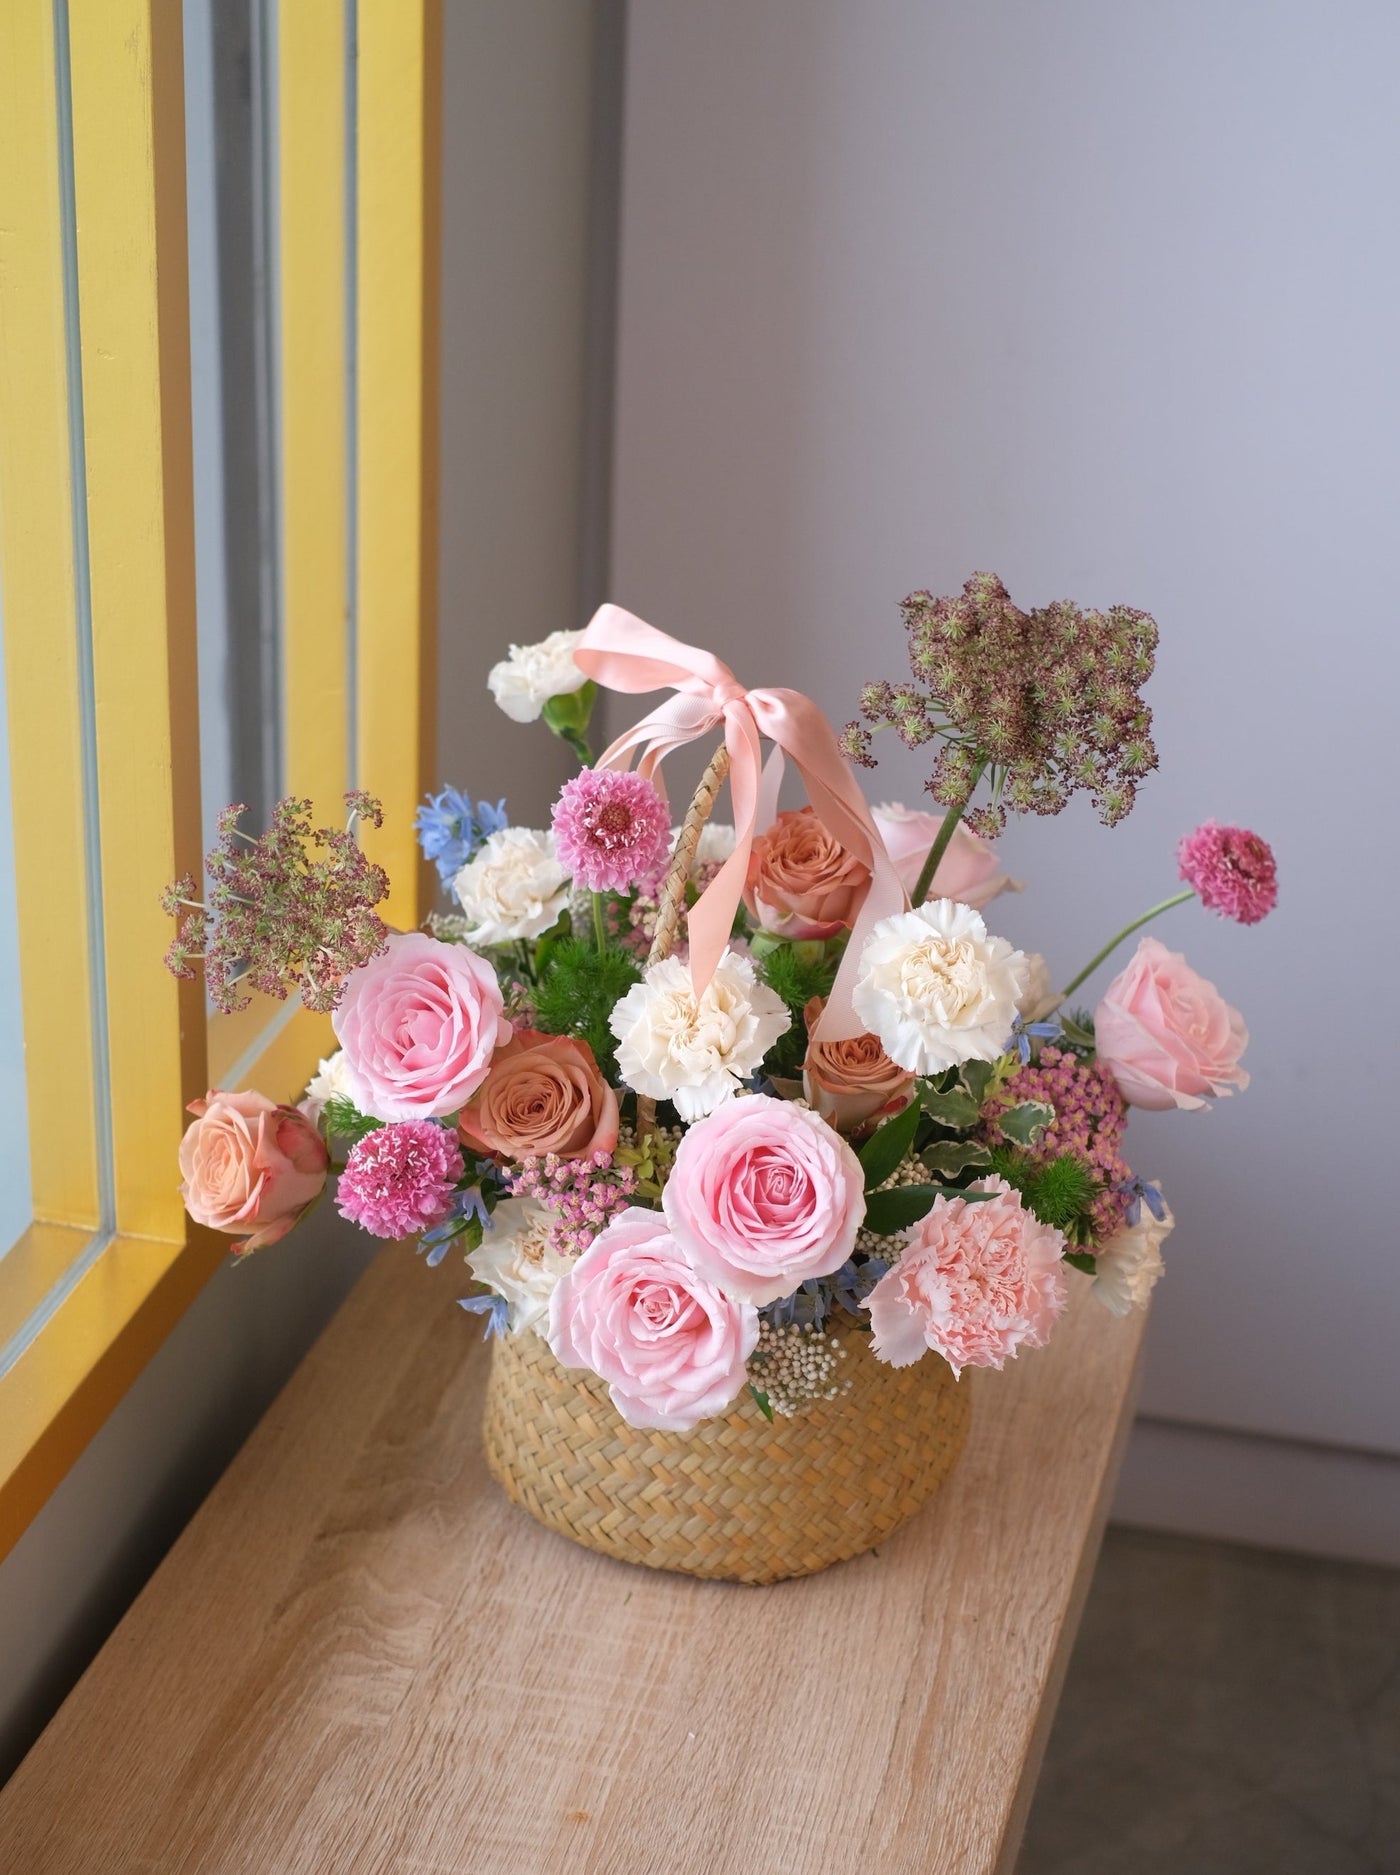 Premium Mother's Day Flower Arrangement, Online Florist in Butterworth, Penang. Mother's Day gift for mom. Top 10 florist in Penang, 30 years trusted Florist, best reviewed in Google.